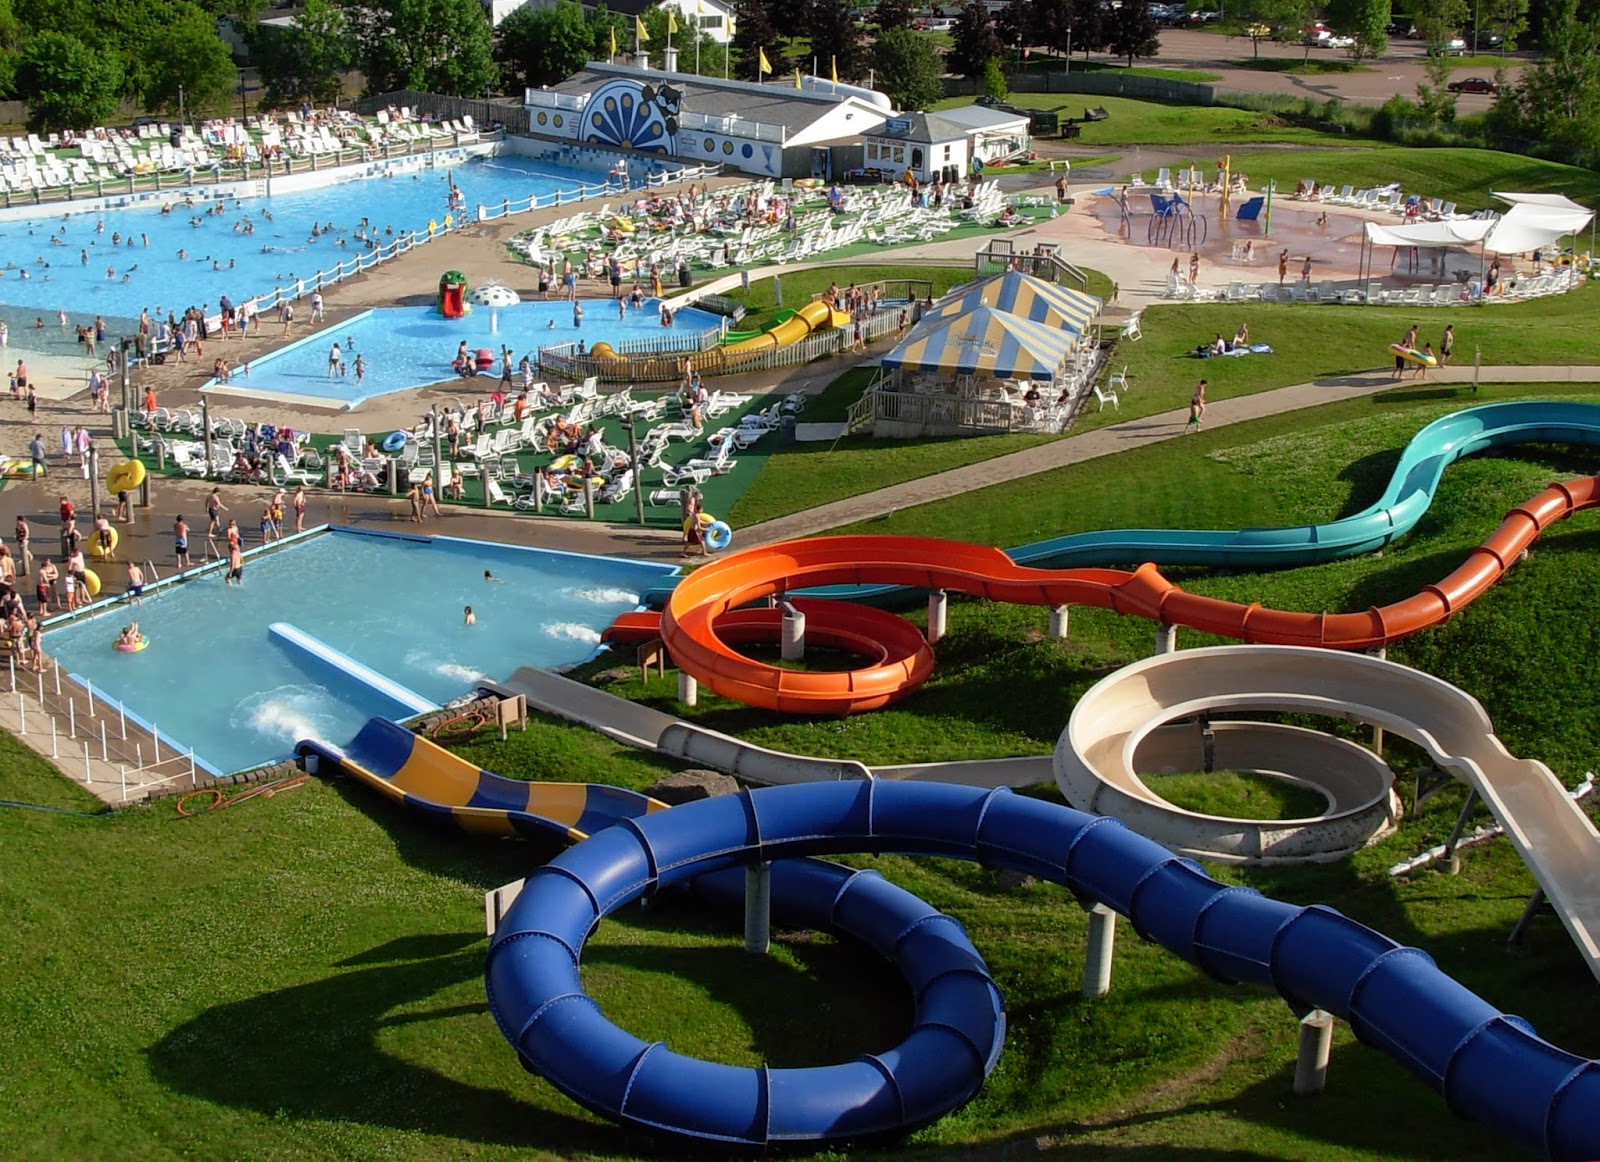 World Visits: A Valuable Place Water Park - Specially Kids Enjoying Area